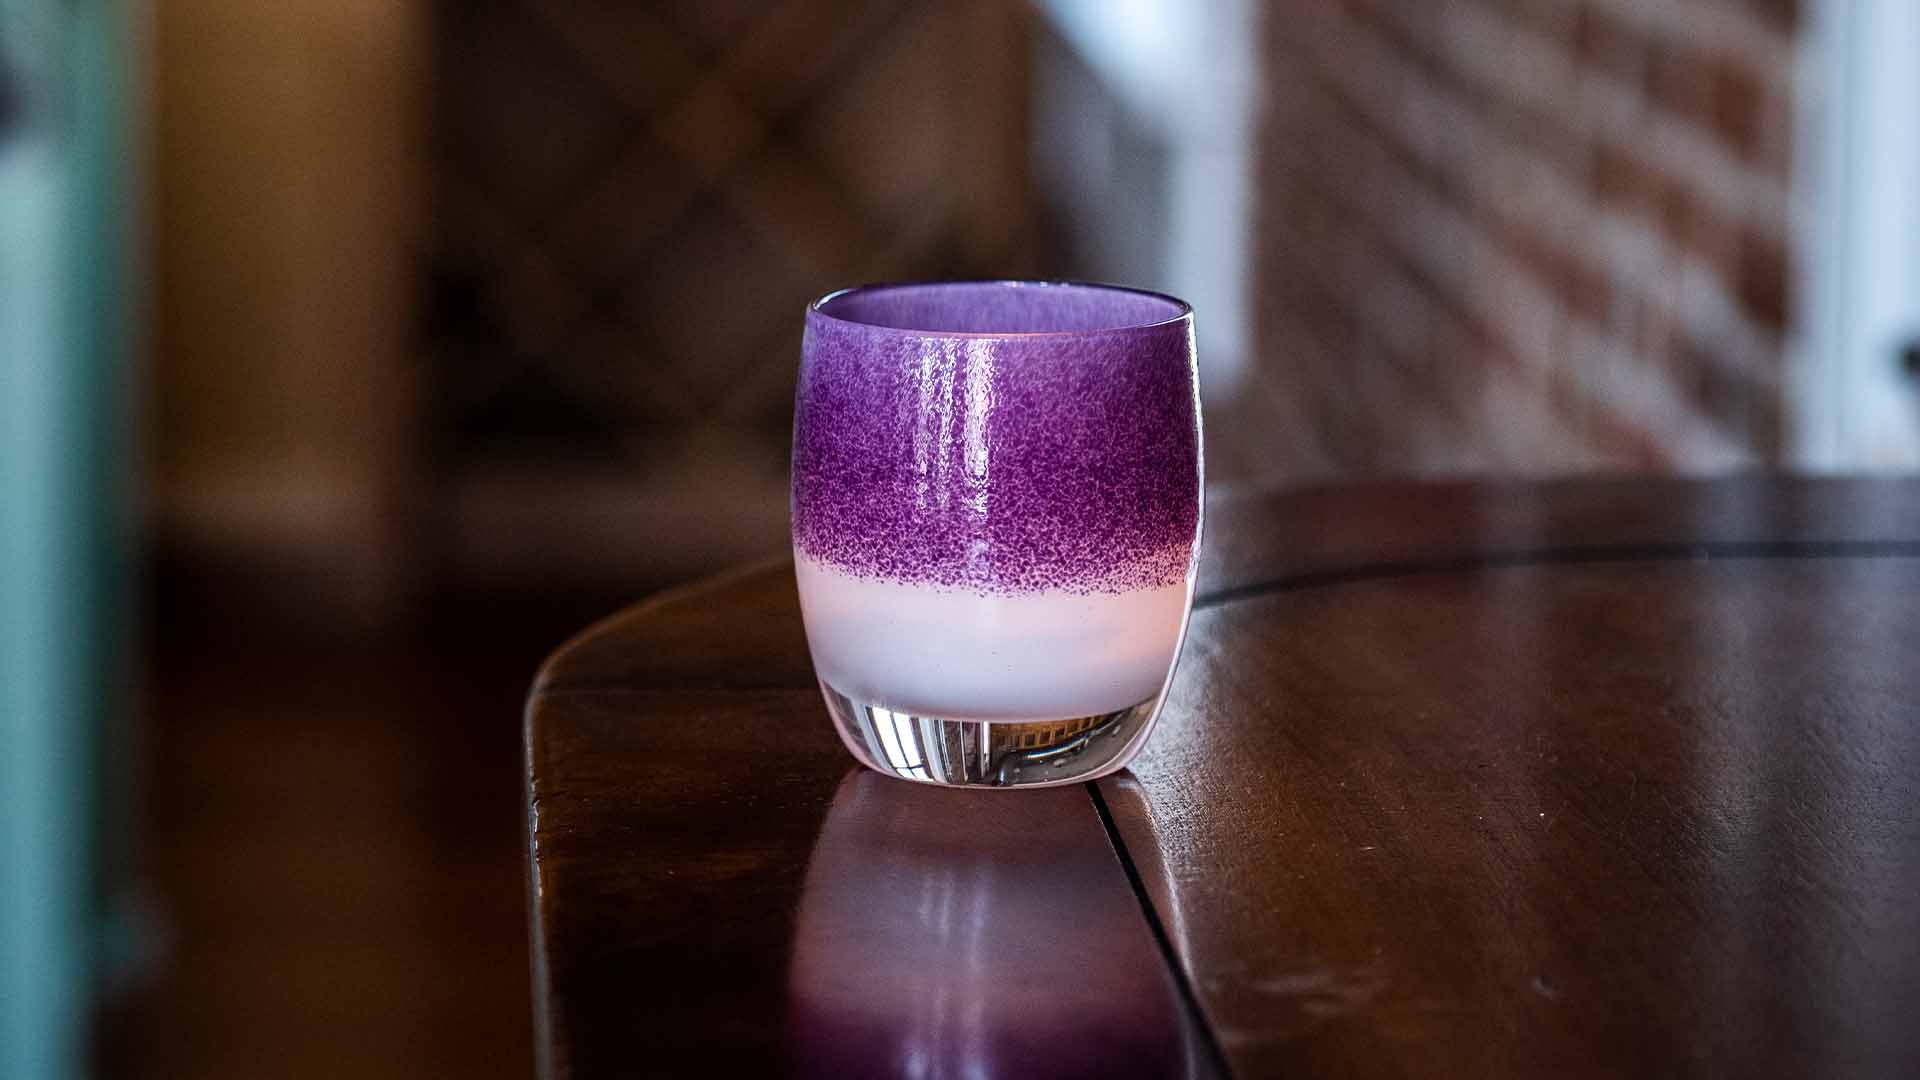 protector purple on white, hand-blown glass votive candle holder, sitting on a dark wood counter backed by exposed brick.